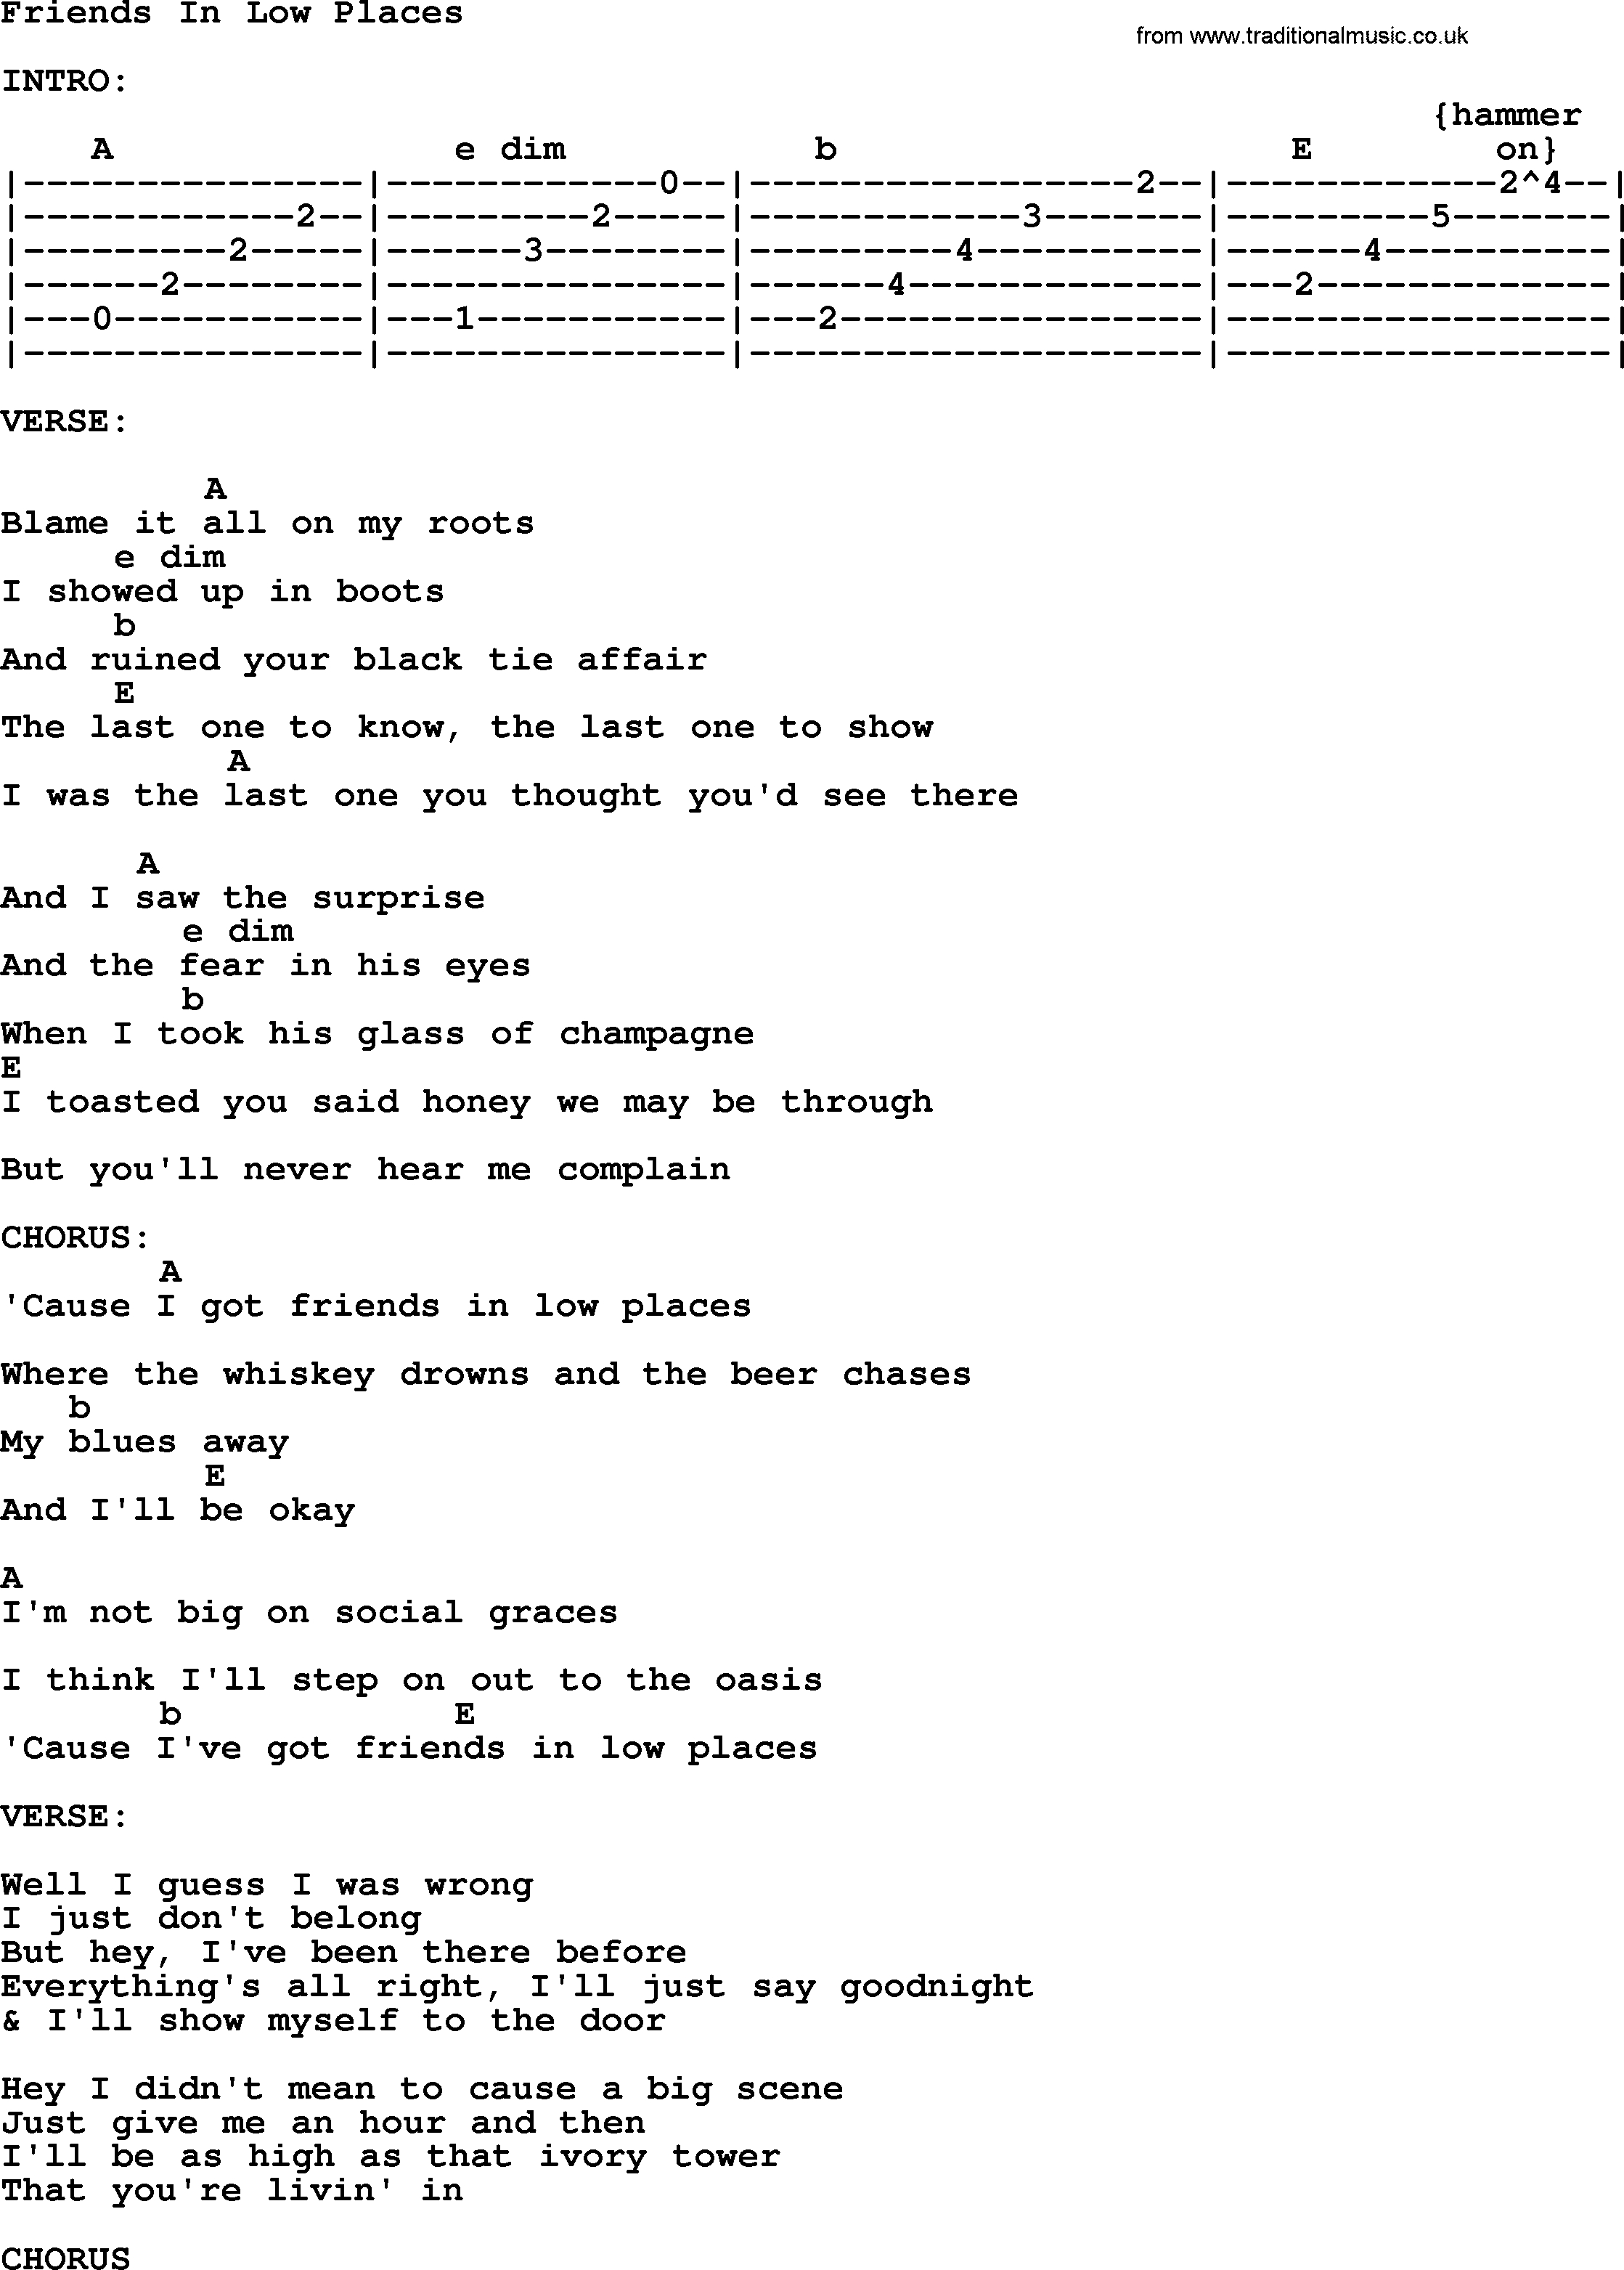 Friends In Low Places Chords Friends In Low Places Garth Brooks Lyrics And Chords